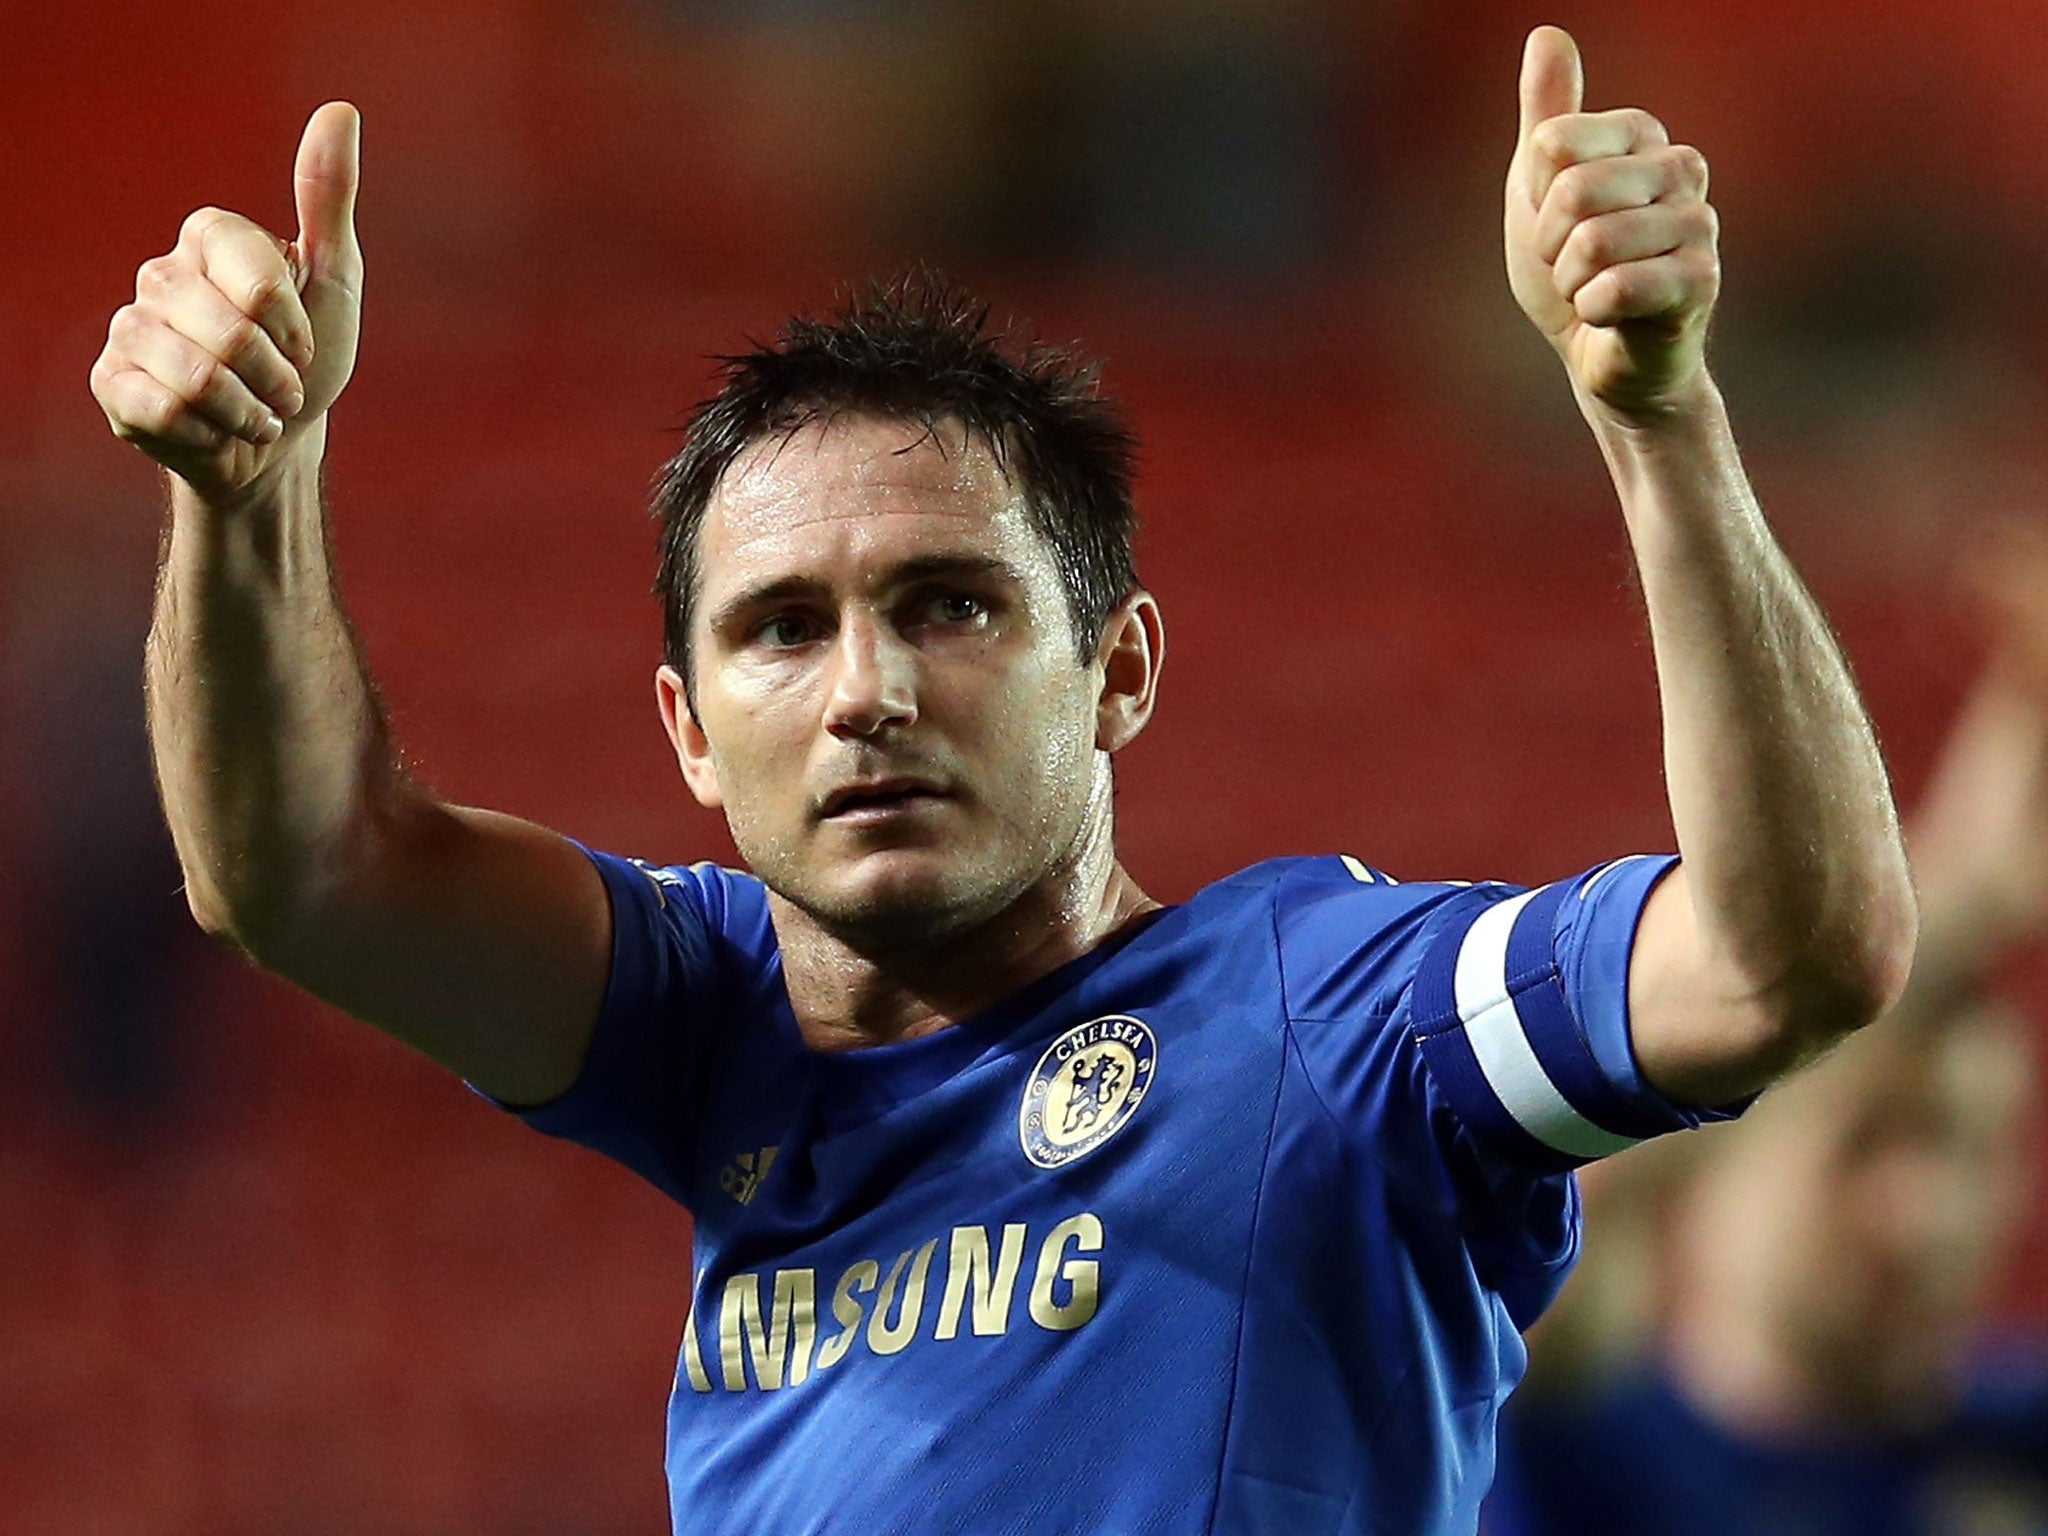 Chelsea revealed they are involved in negotiations aimed at keeping Frank Lampard at the club beyond the end of the season